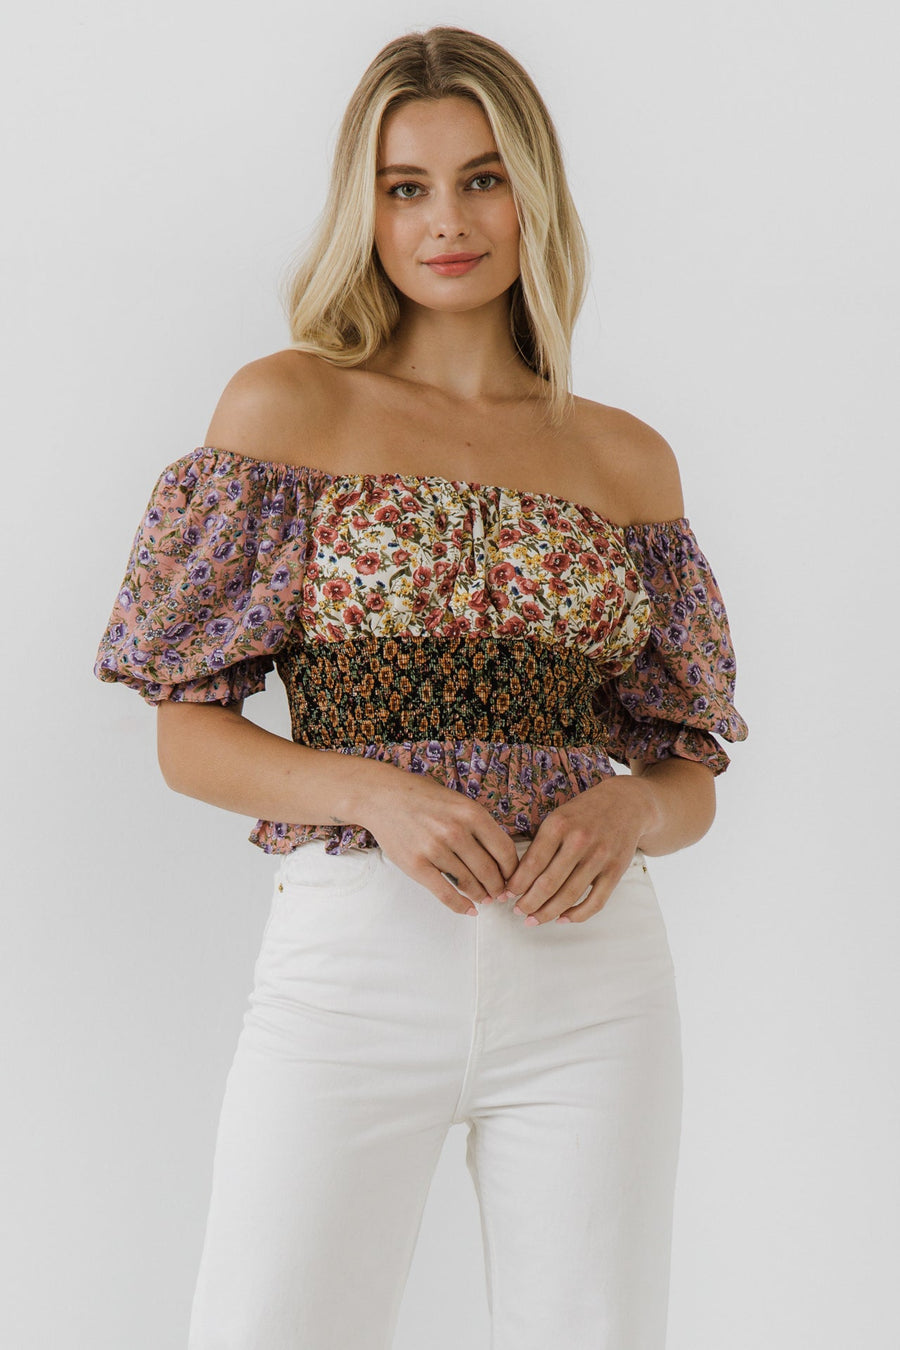 FREE THE ROSES-Floral Multi Color Top-TOPS available at Objectrare